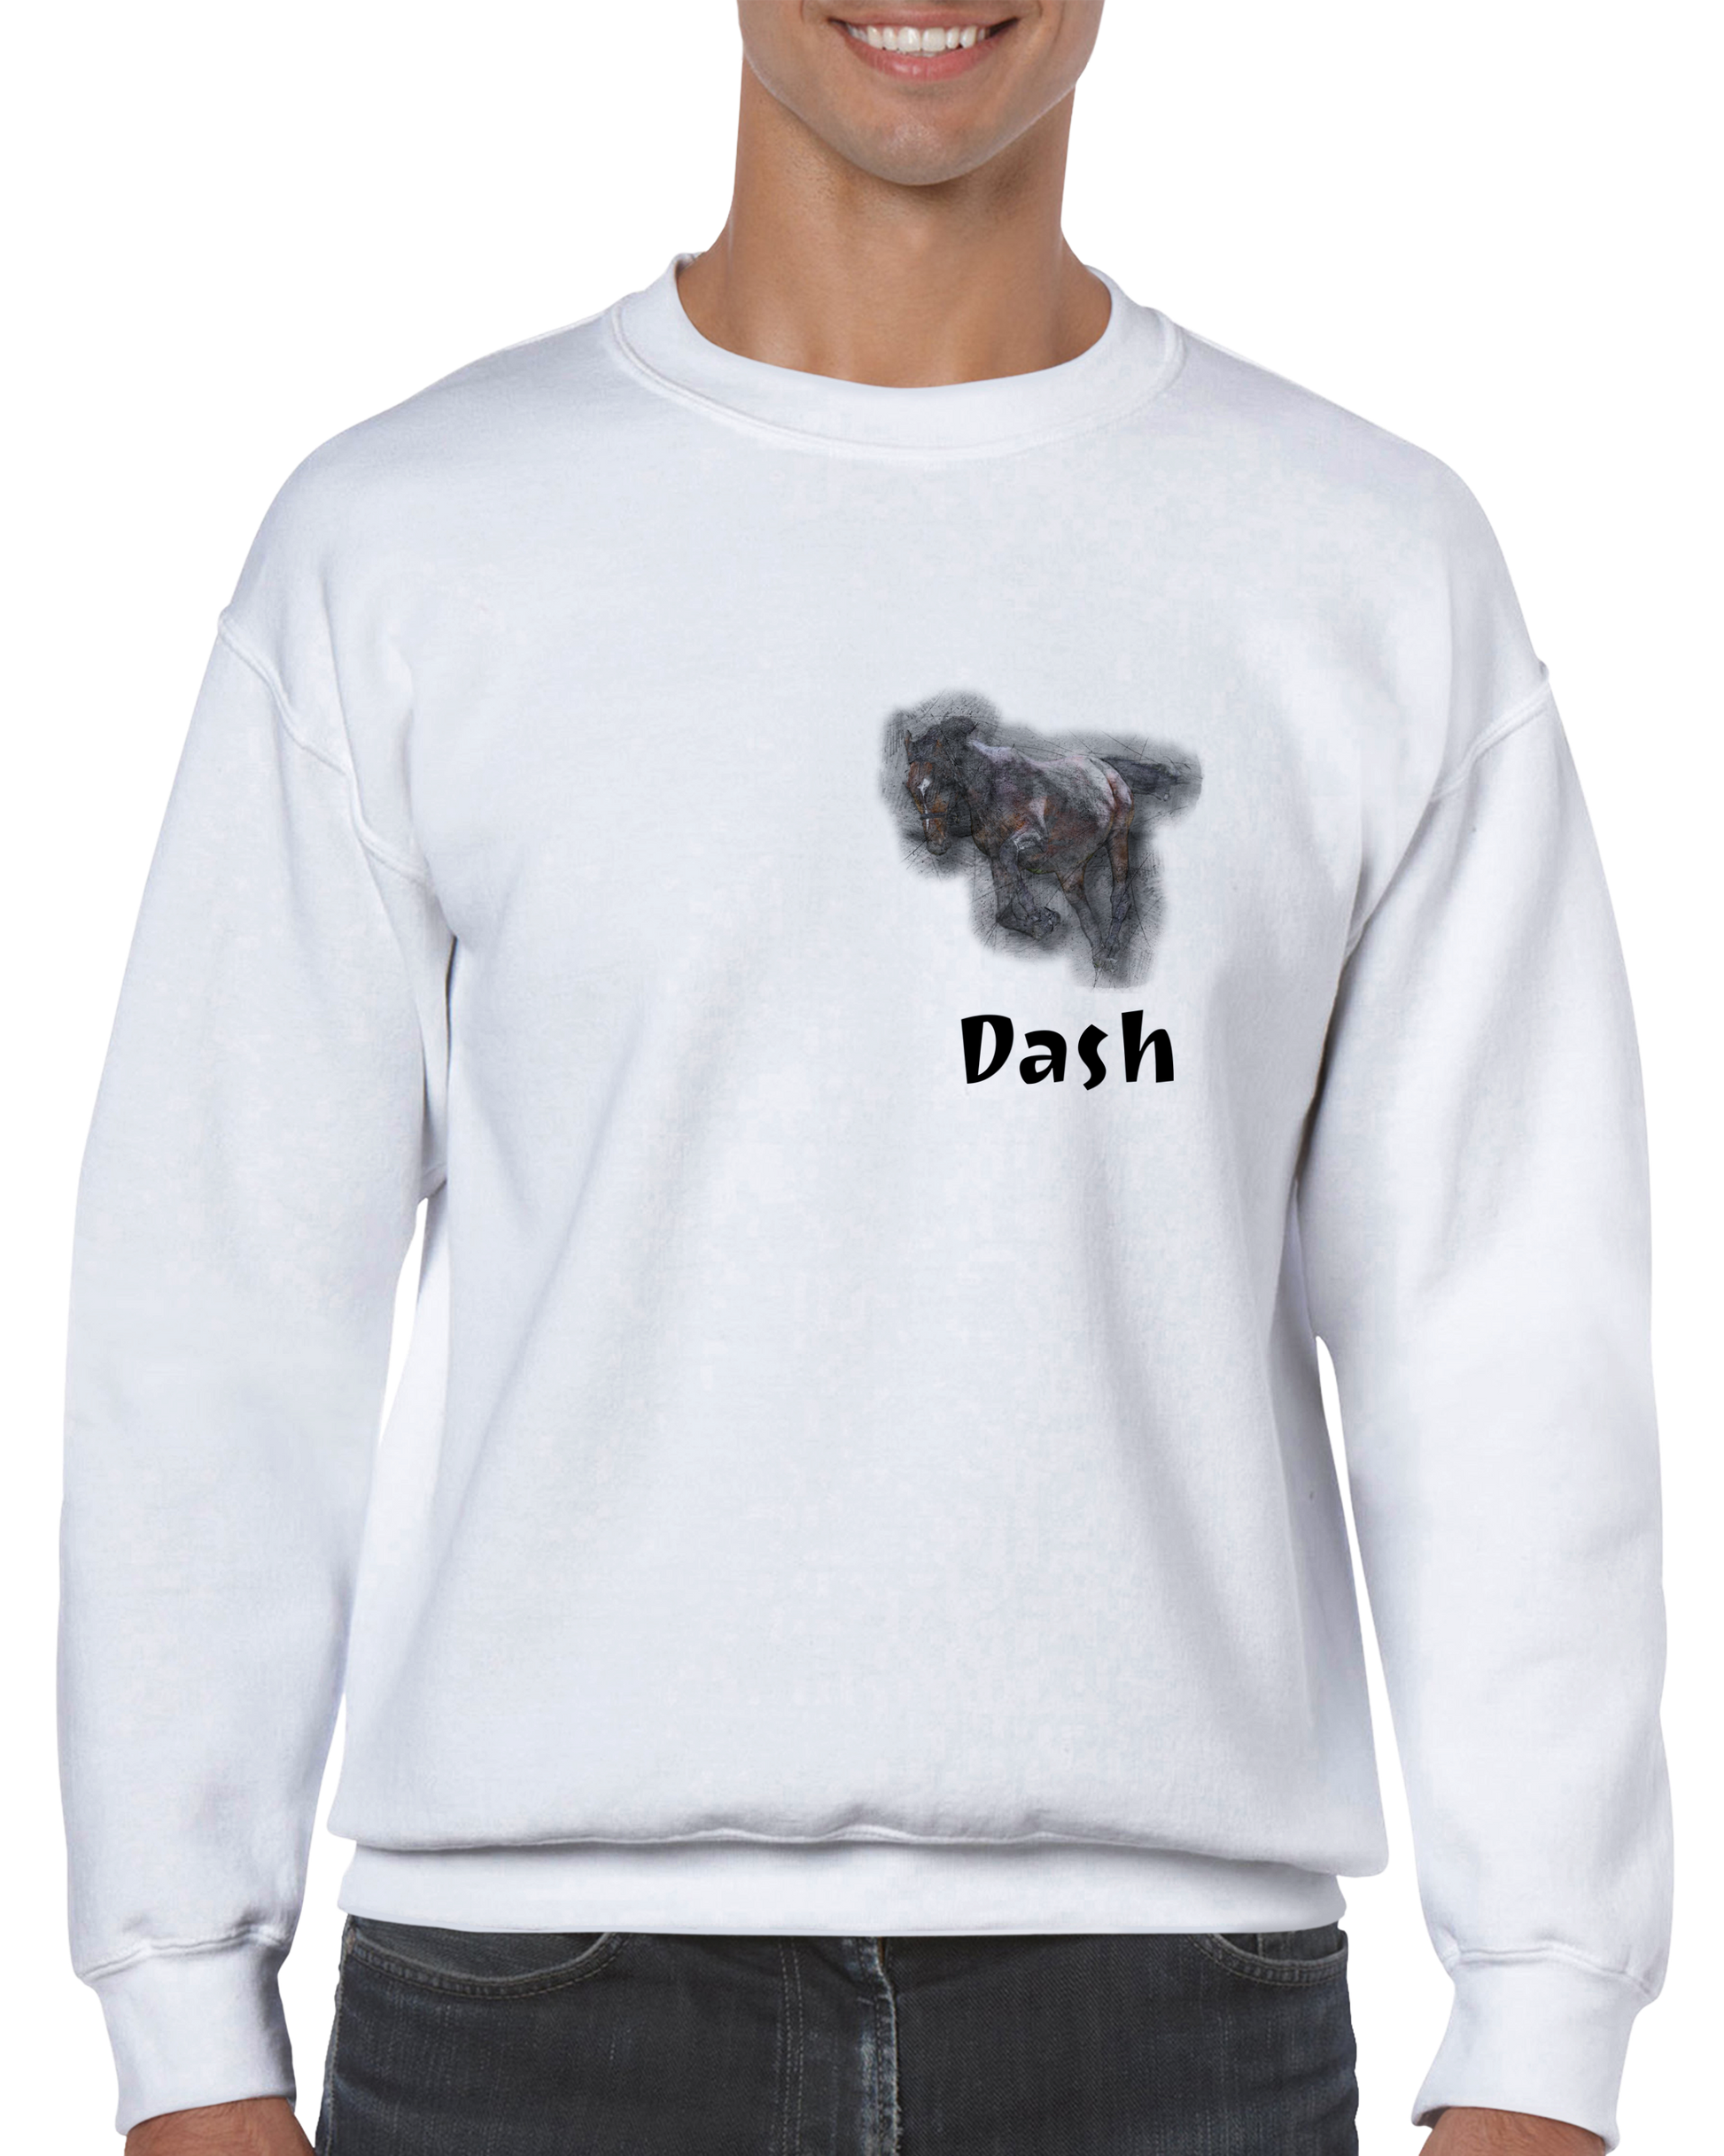 Hand Drawn Horse || Unisex Crewneck Sweatshirt - Pencil Drawing - Personalized; Personalized with your horse